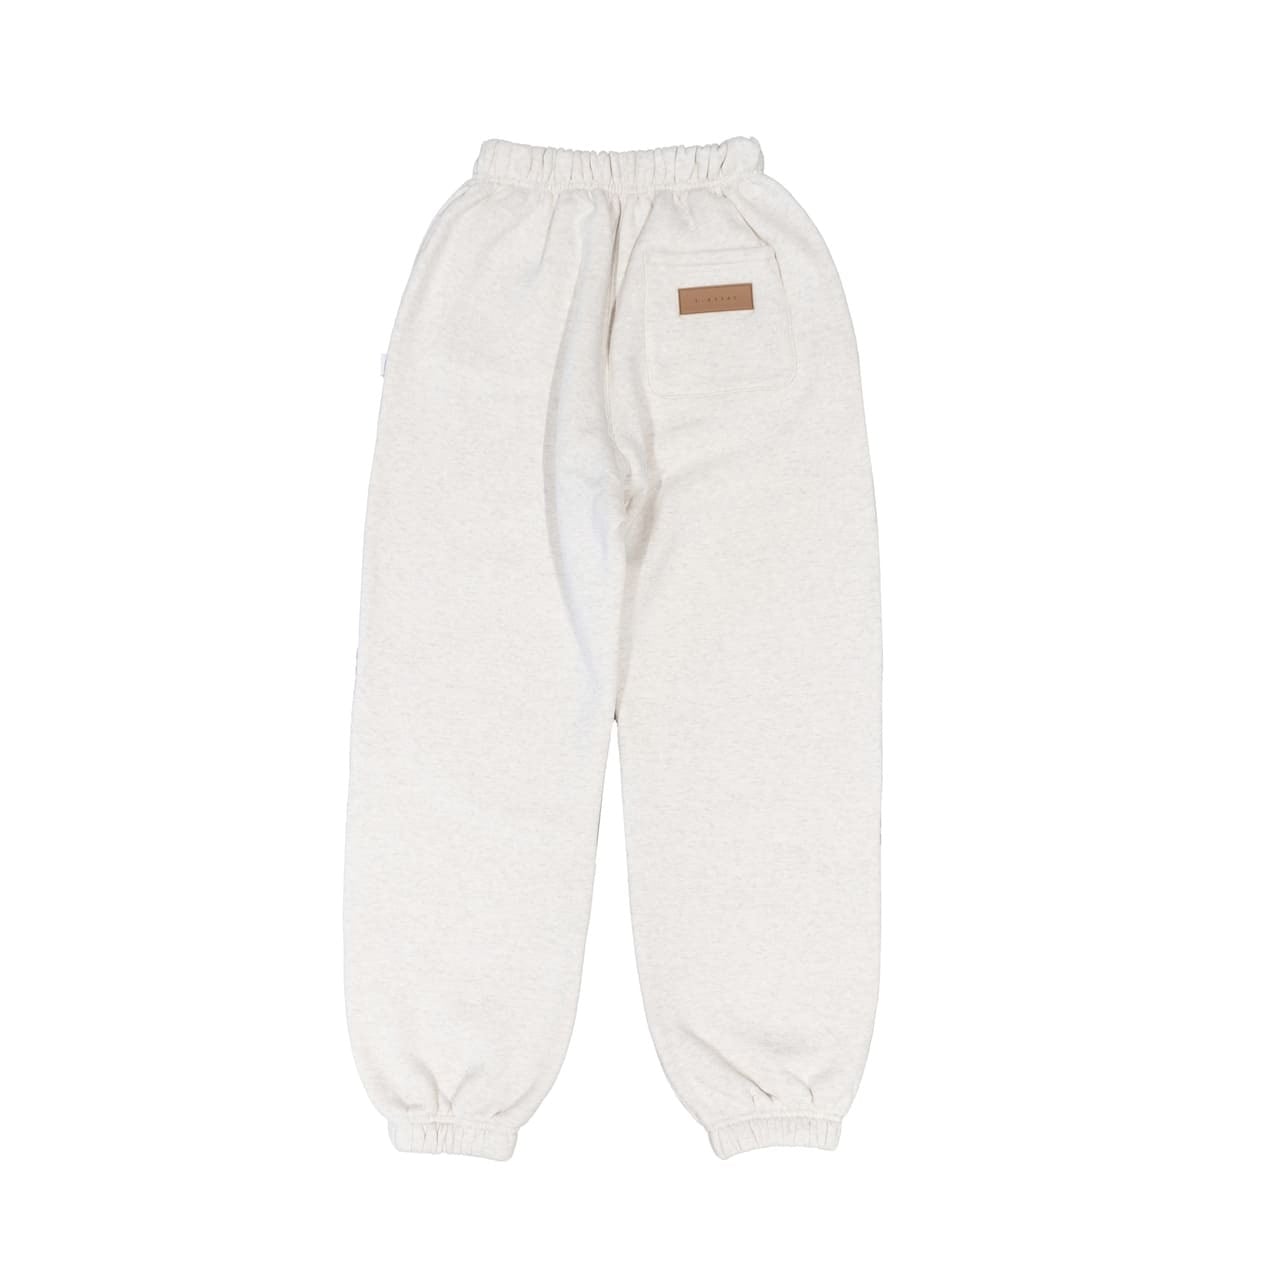 JOGGER PANTS / OFF WHITE | T-ASSAC OFFICIAL WEBSITE ｜ ティーエイサック